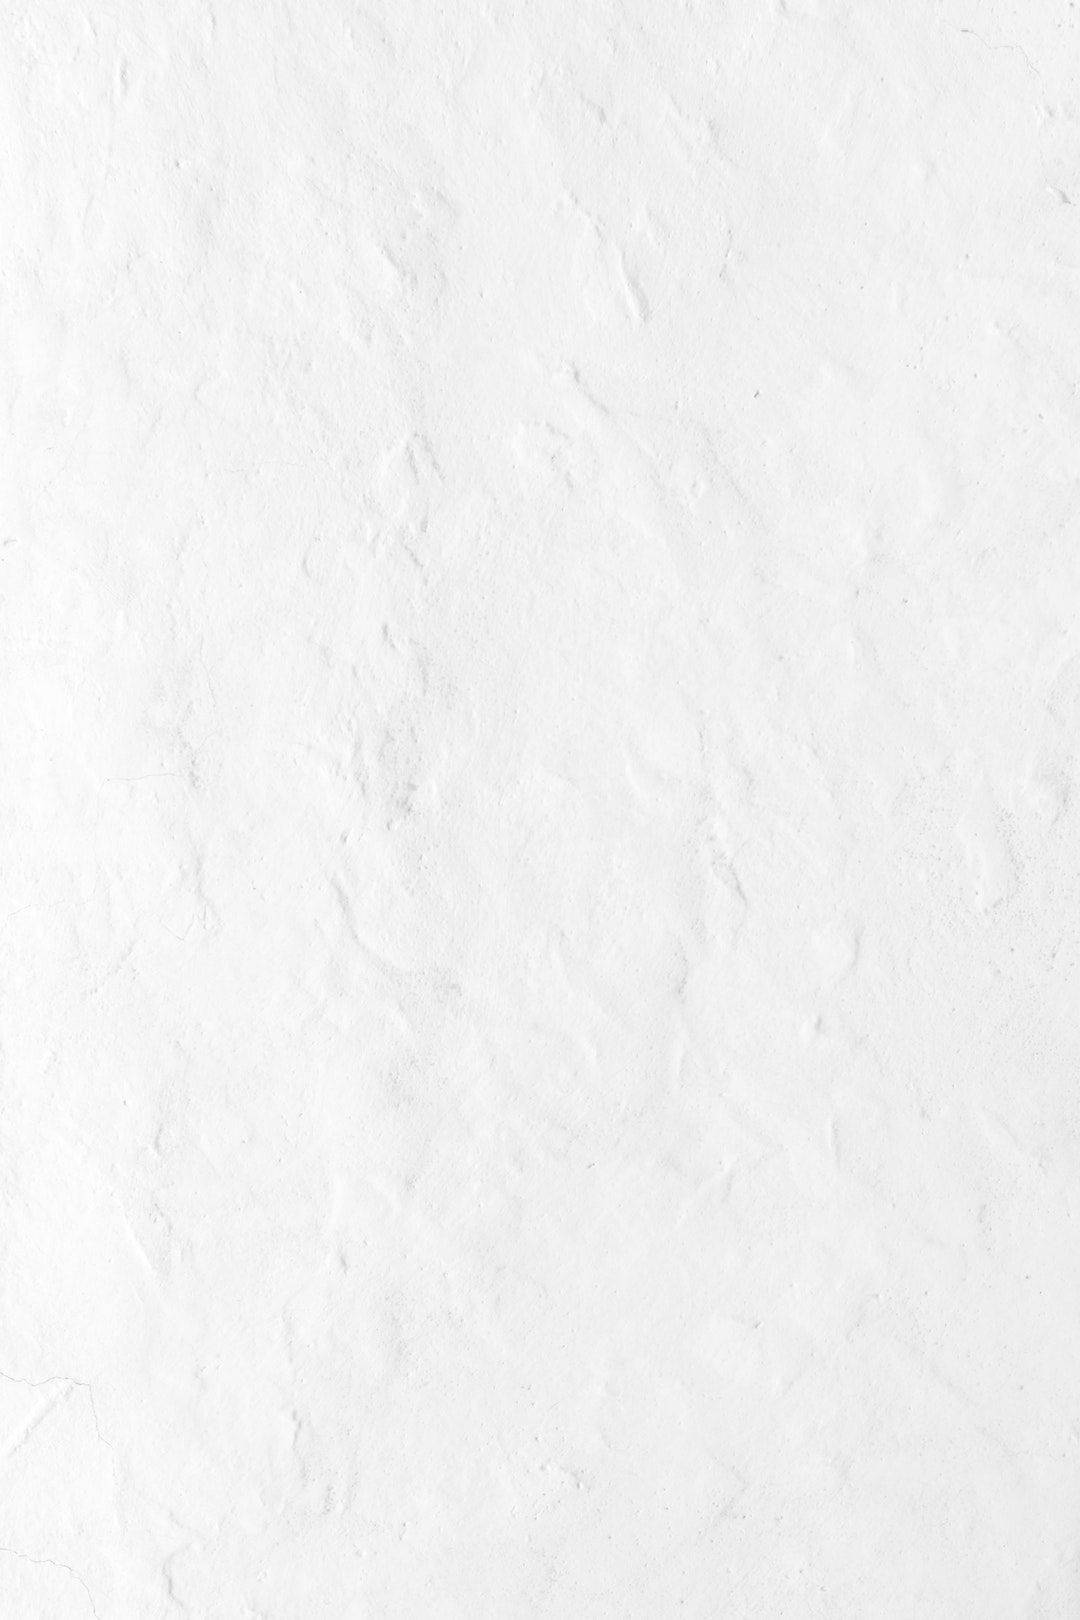 Textured Wall White Screen Phone Background